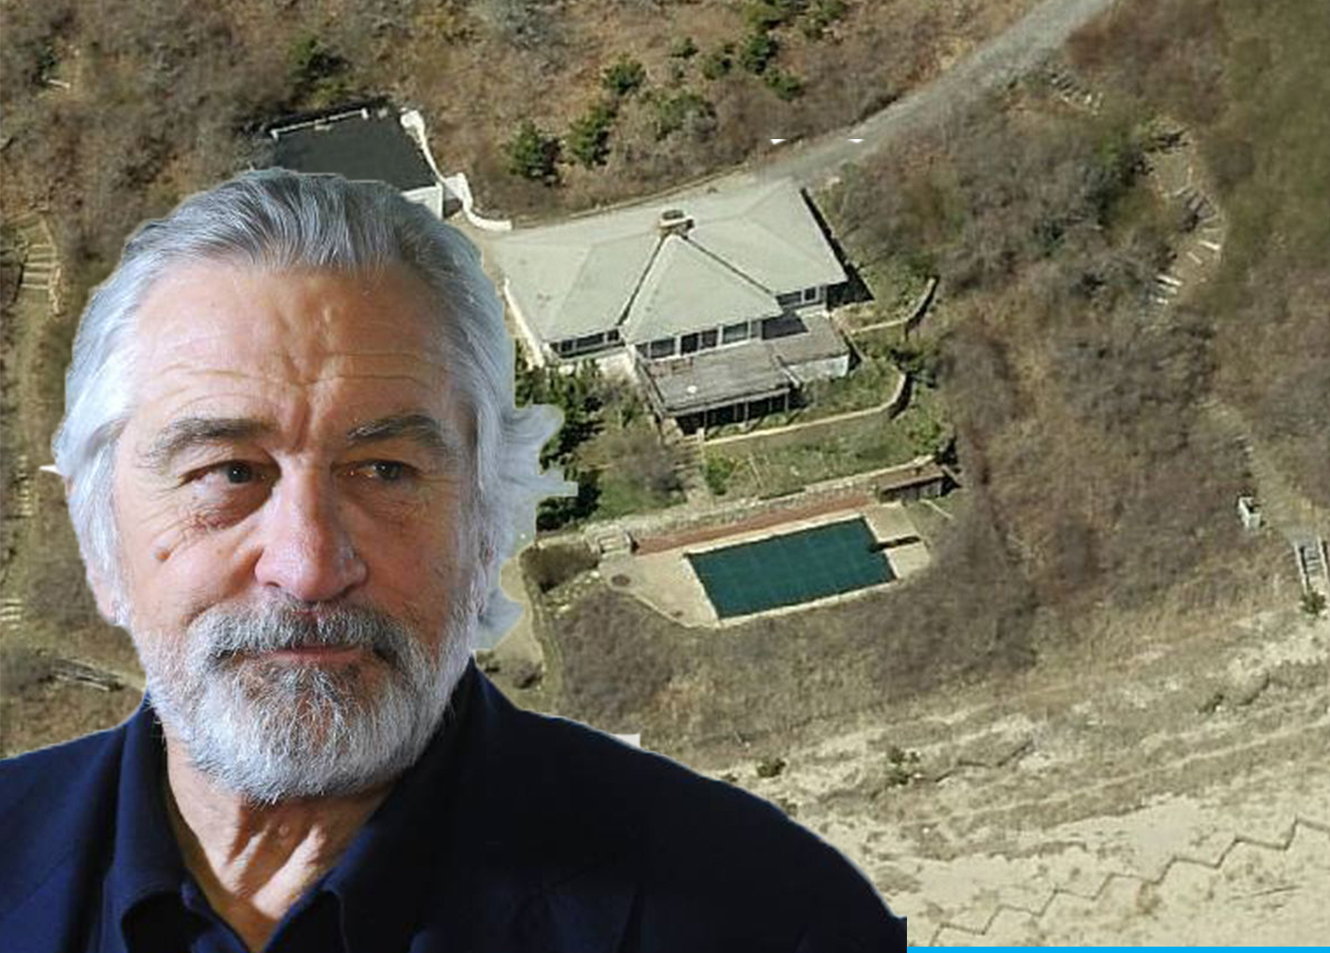 Robert DeNiro seeks to build a 2,554-square-foot home on the site of the 1950s-era home he owns in Montauk.